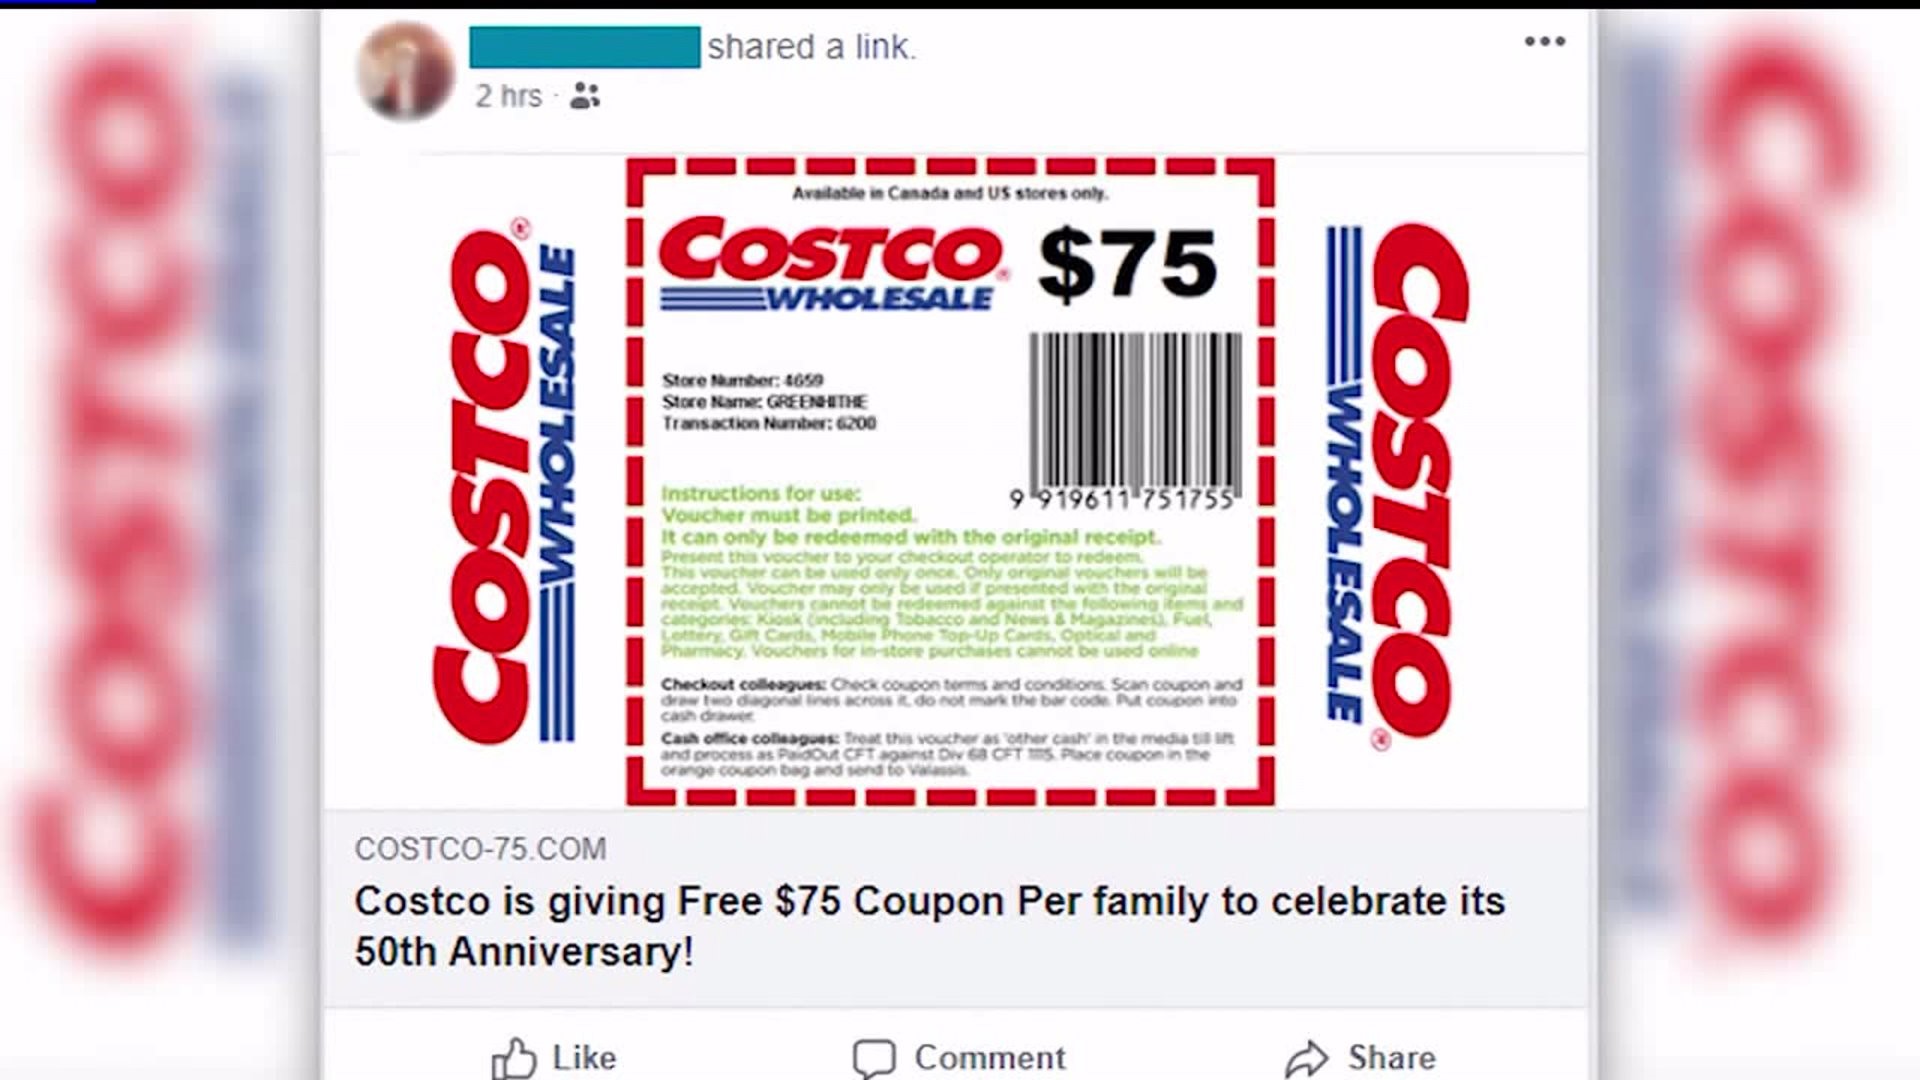 What Is The Costco Promo Code